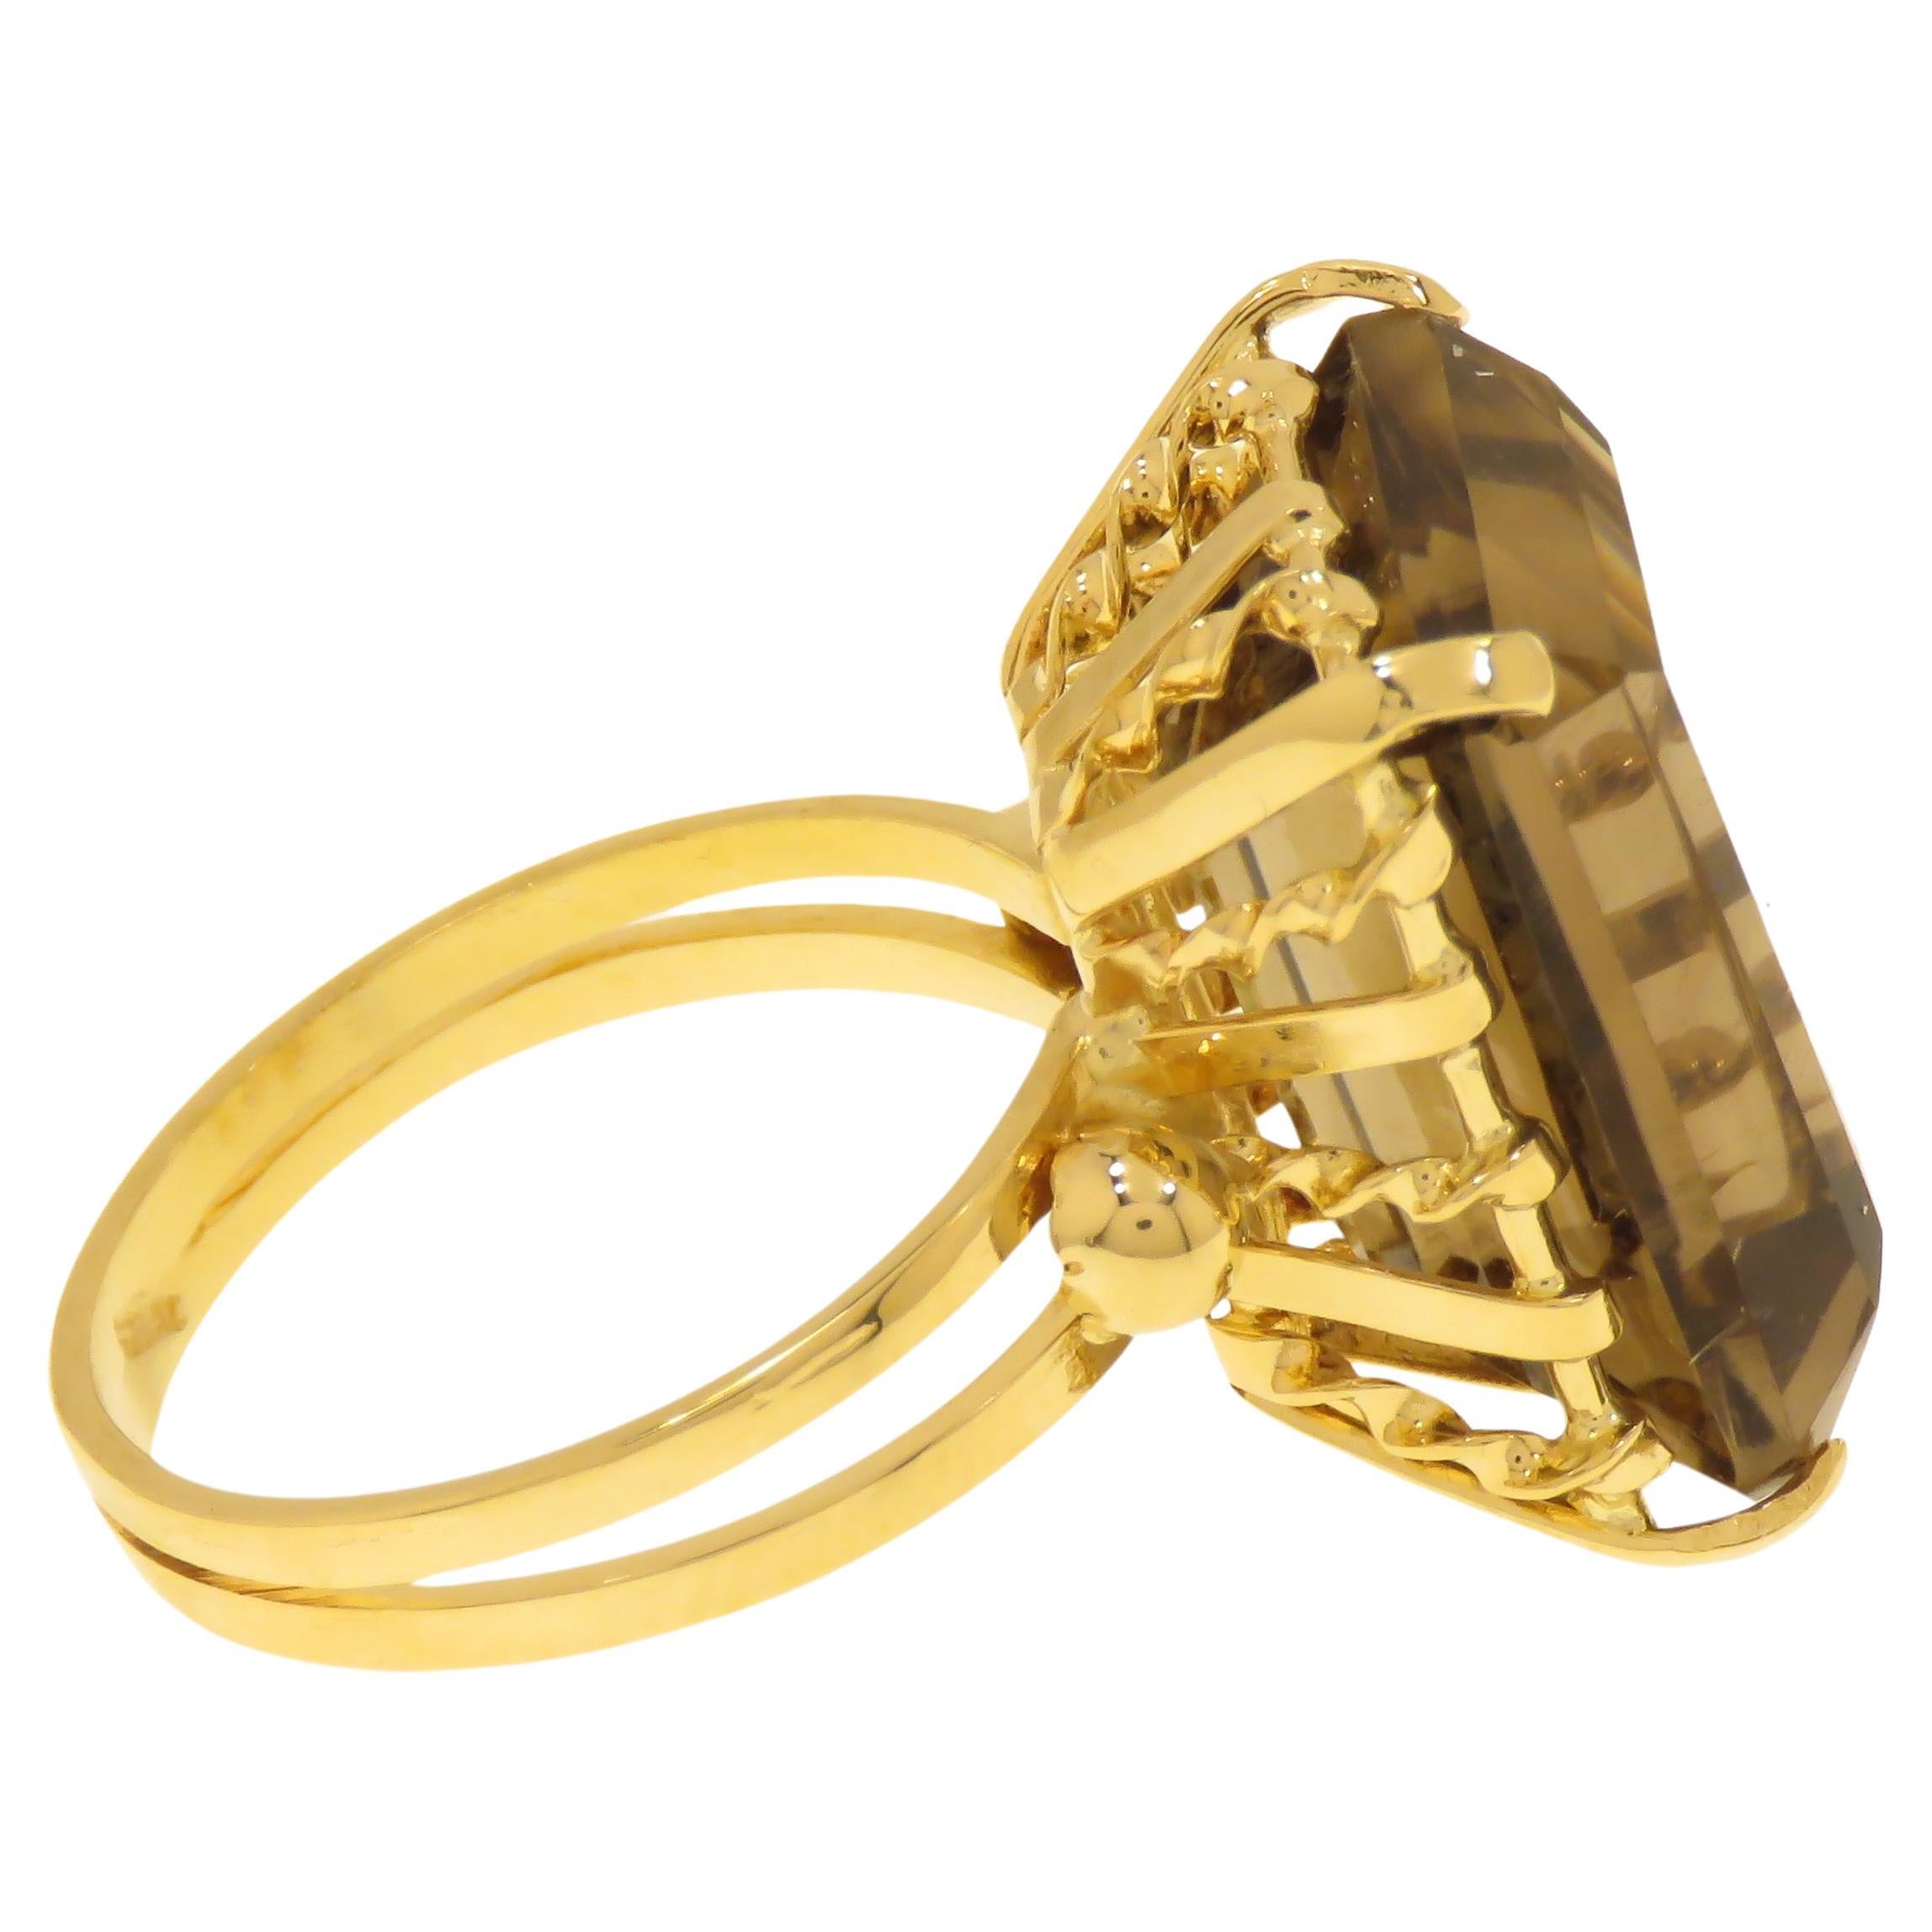 Retro Brown Topaz 18 Karat Yellow Gold Vintage Cocktail Ring Handcrafted in Italy